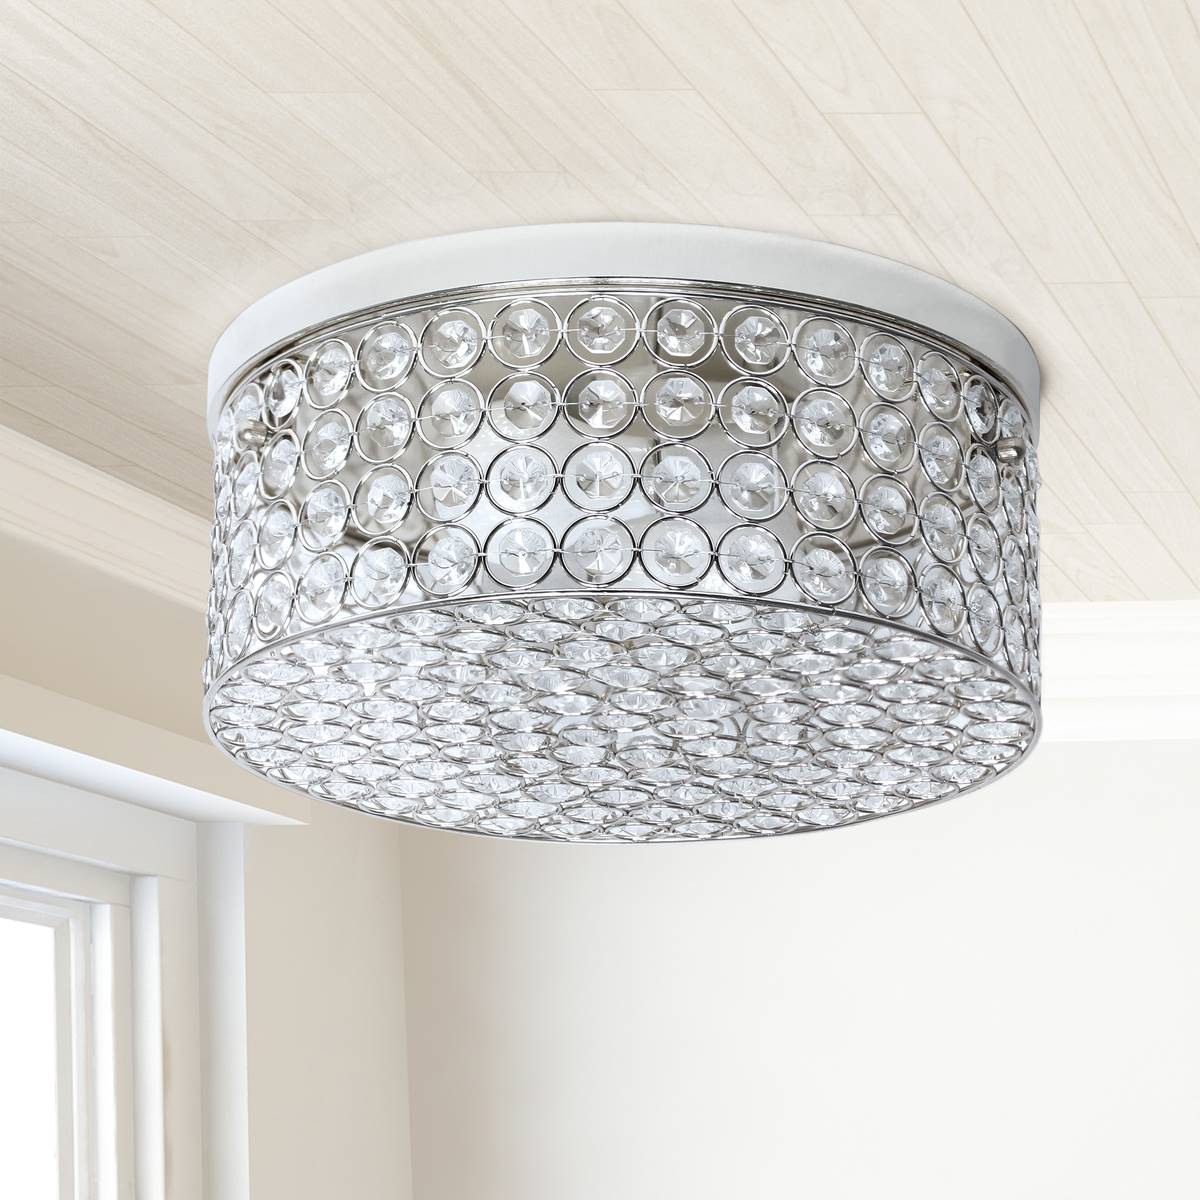 Lalia Home Glam 2 Light 12in. Round Crystal Flush Mount